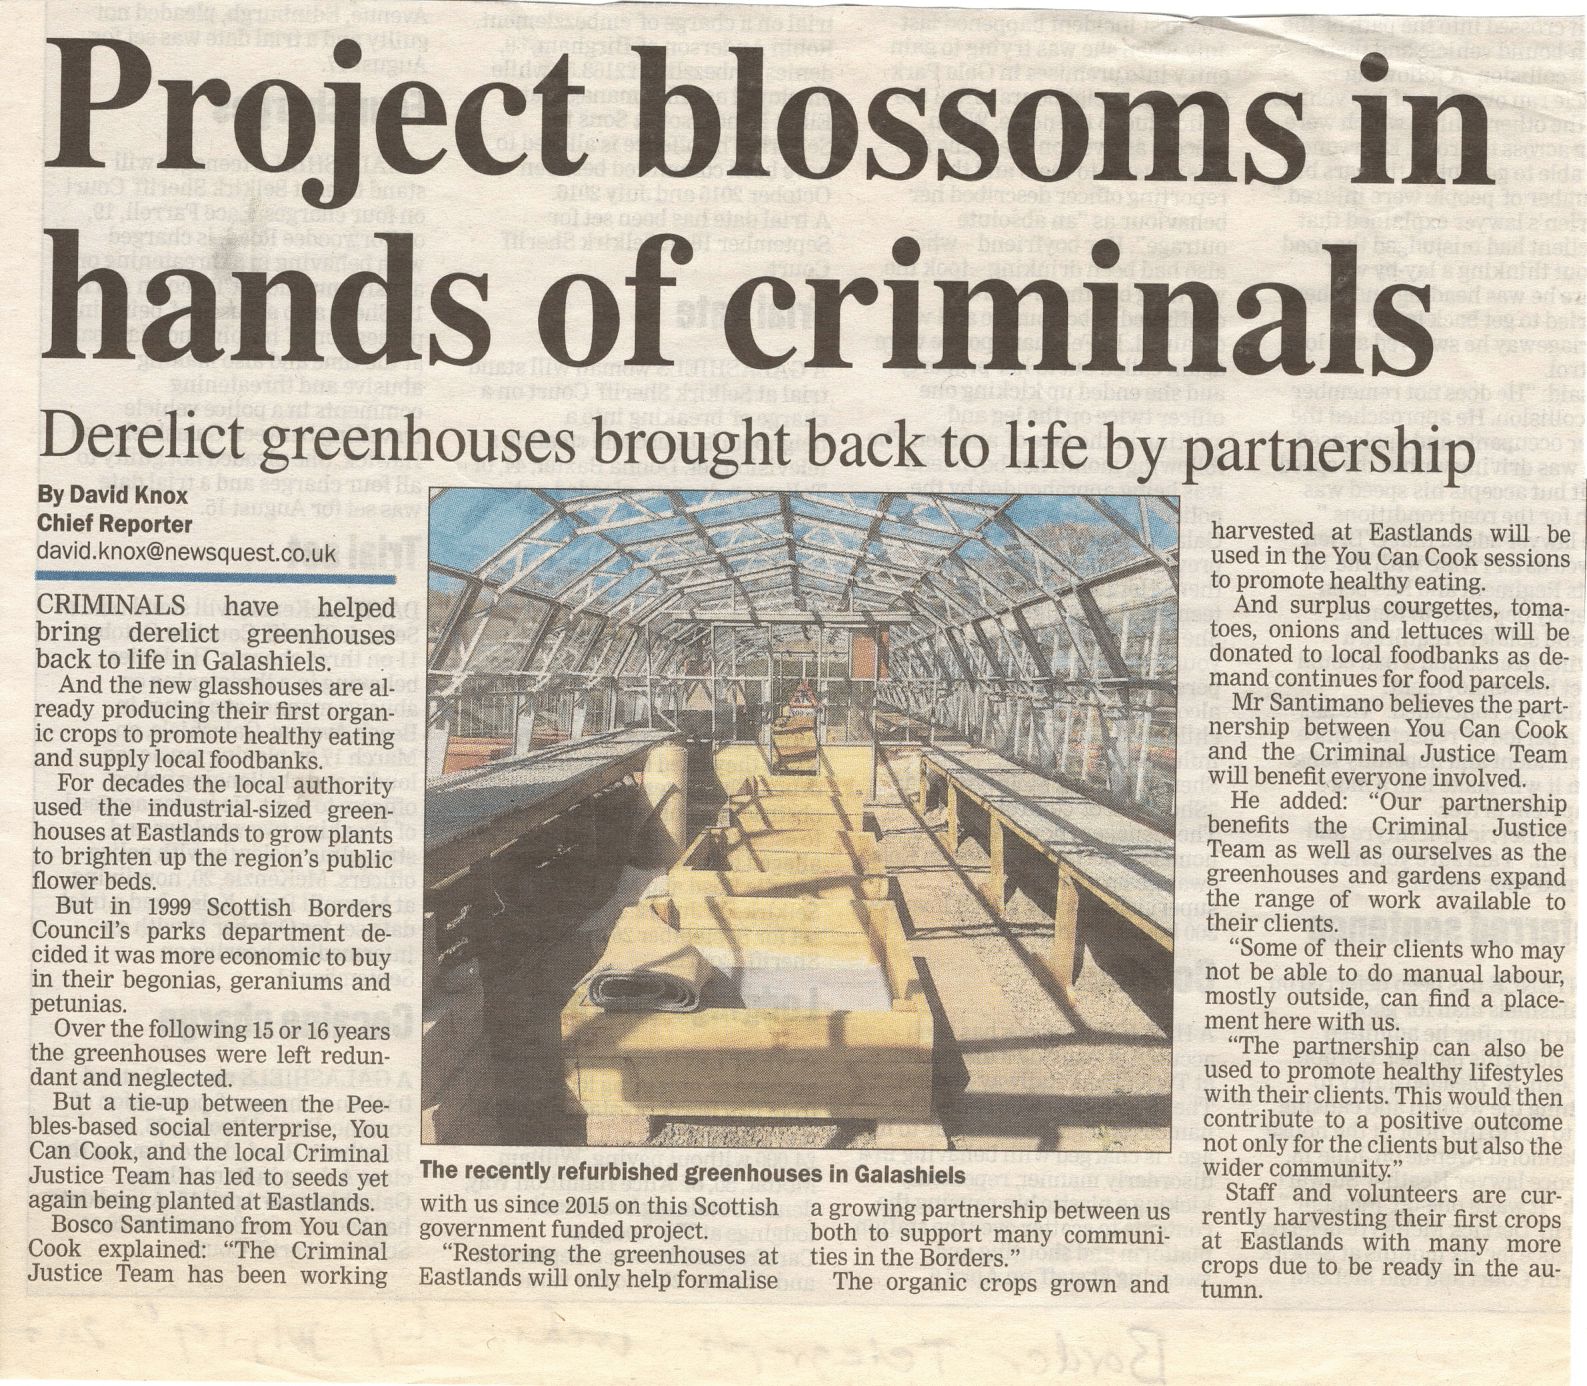 Press Clipping: Project blossoms in hands of criminals